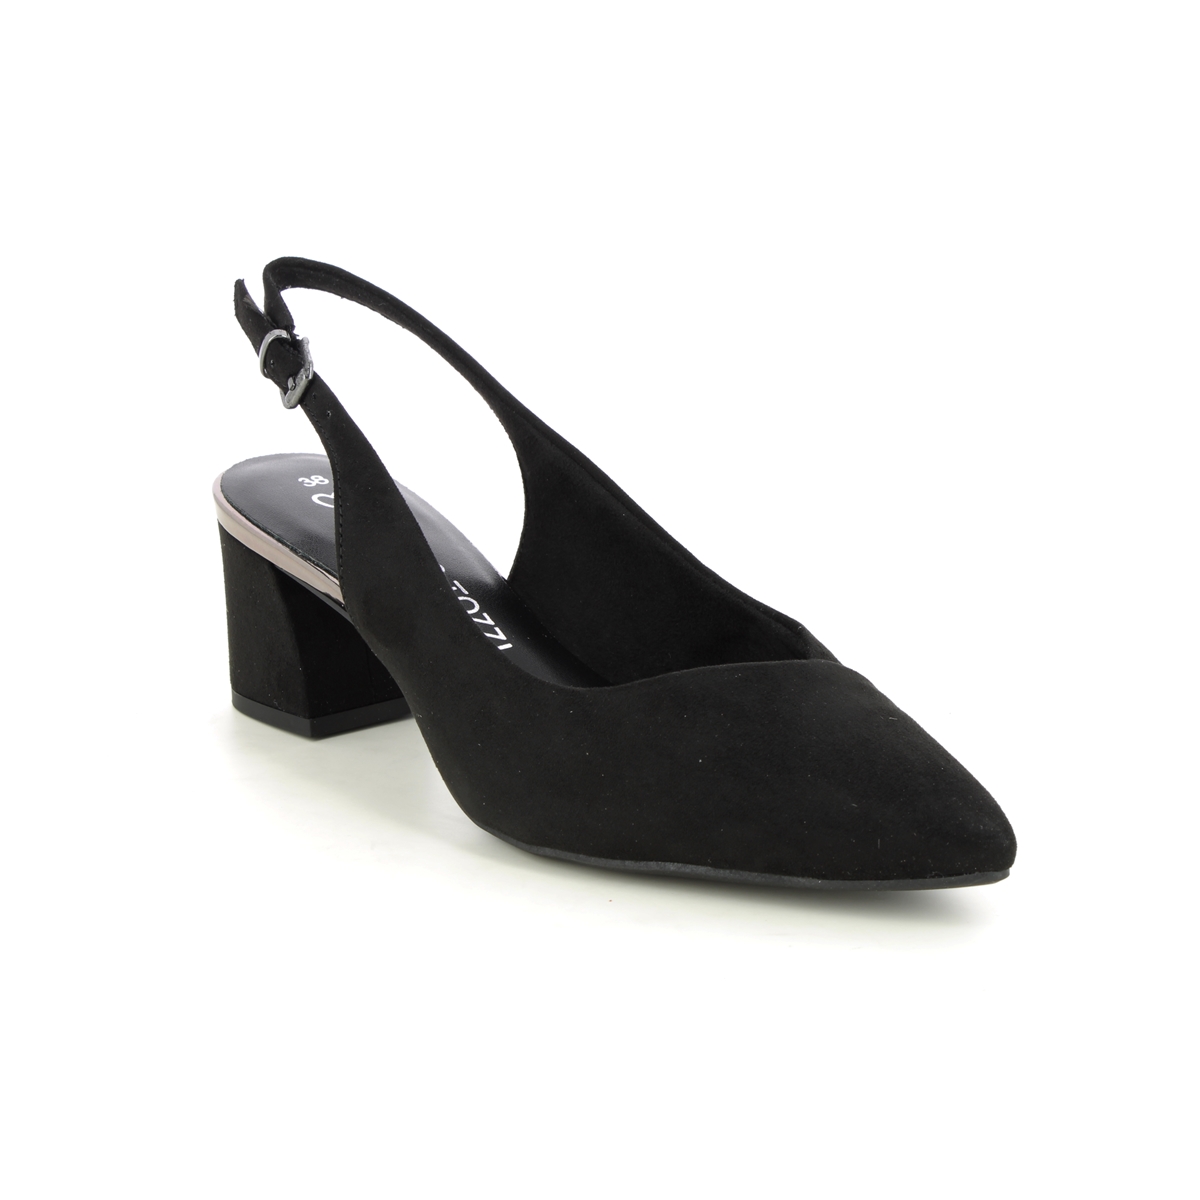 Marco Tozzi Rila Black Womens Slingback Shoes 29602-42-001 in a Plain Textile in Size 37